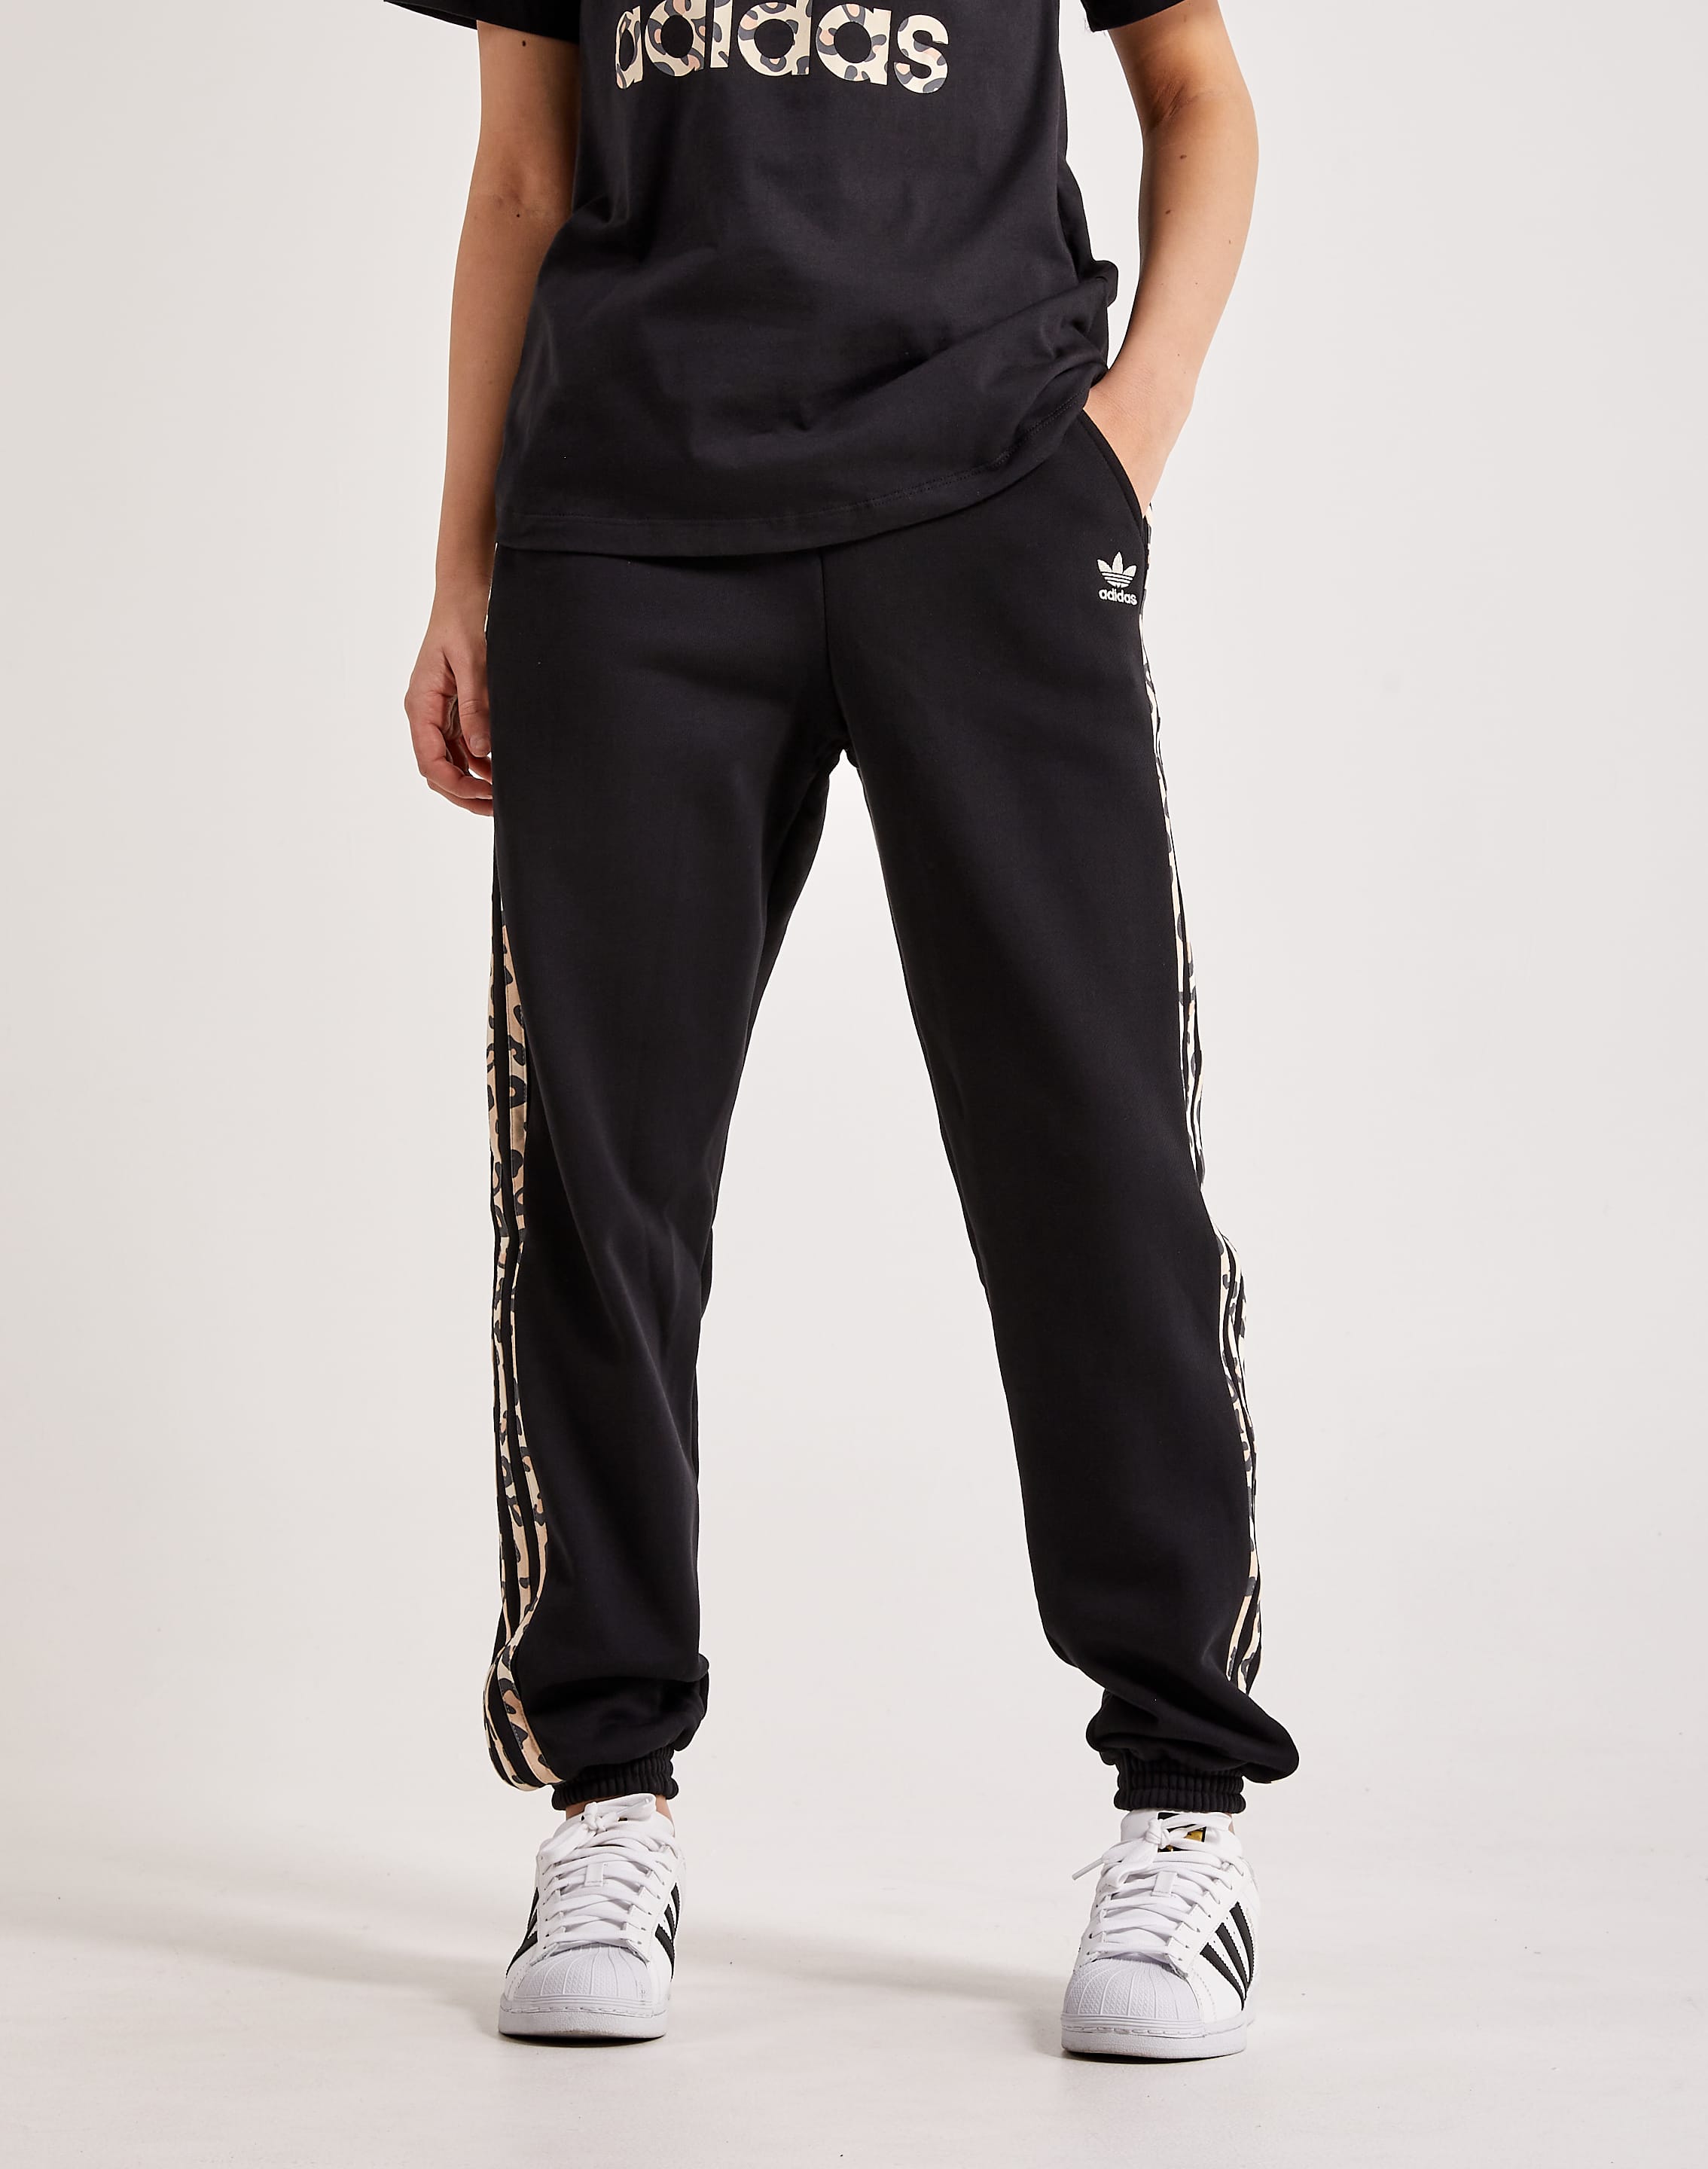 Adidas Originals 'Leopard Luxe' Leggings In Black With Leopard Three Stripes  for Women